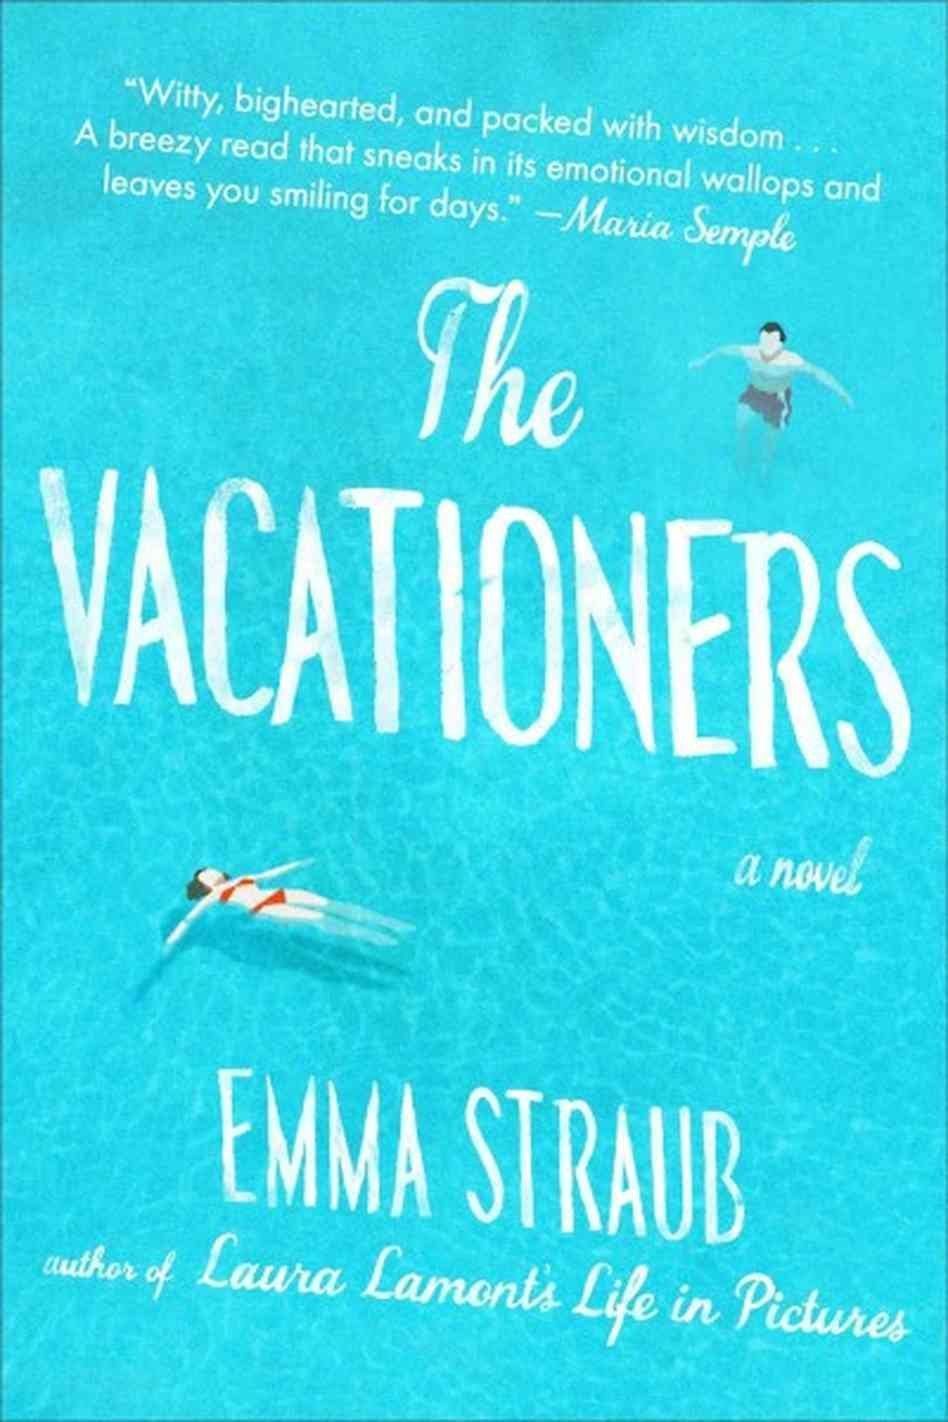 'THE VACATIONERS' by Emma Straub